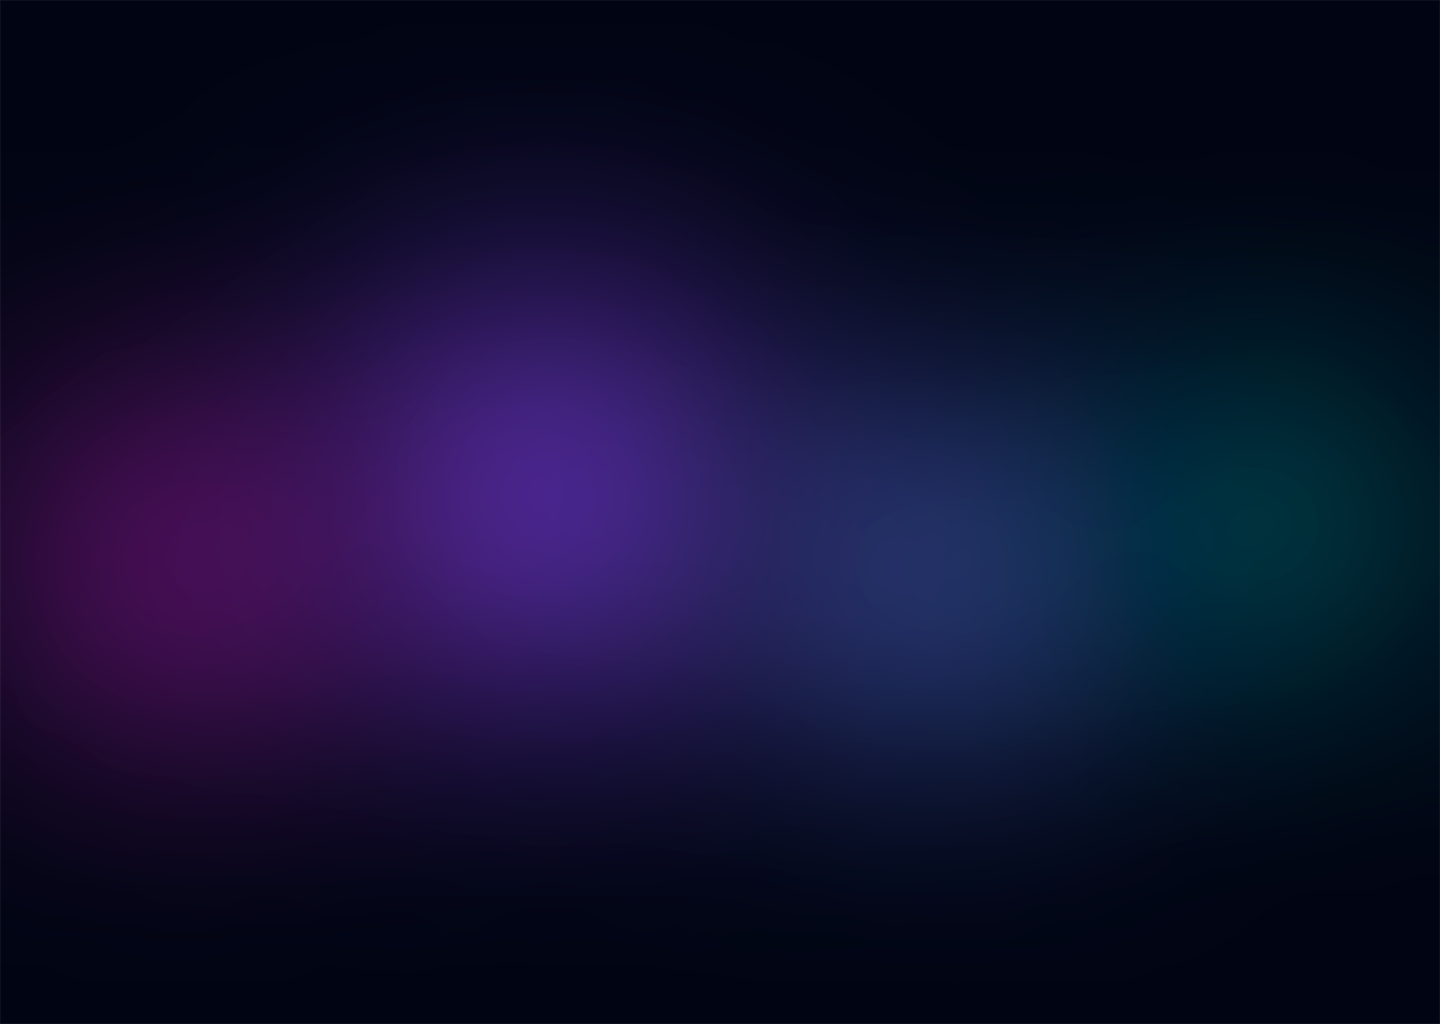 background image with colorful blurred circles.